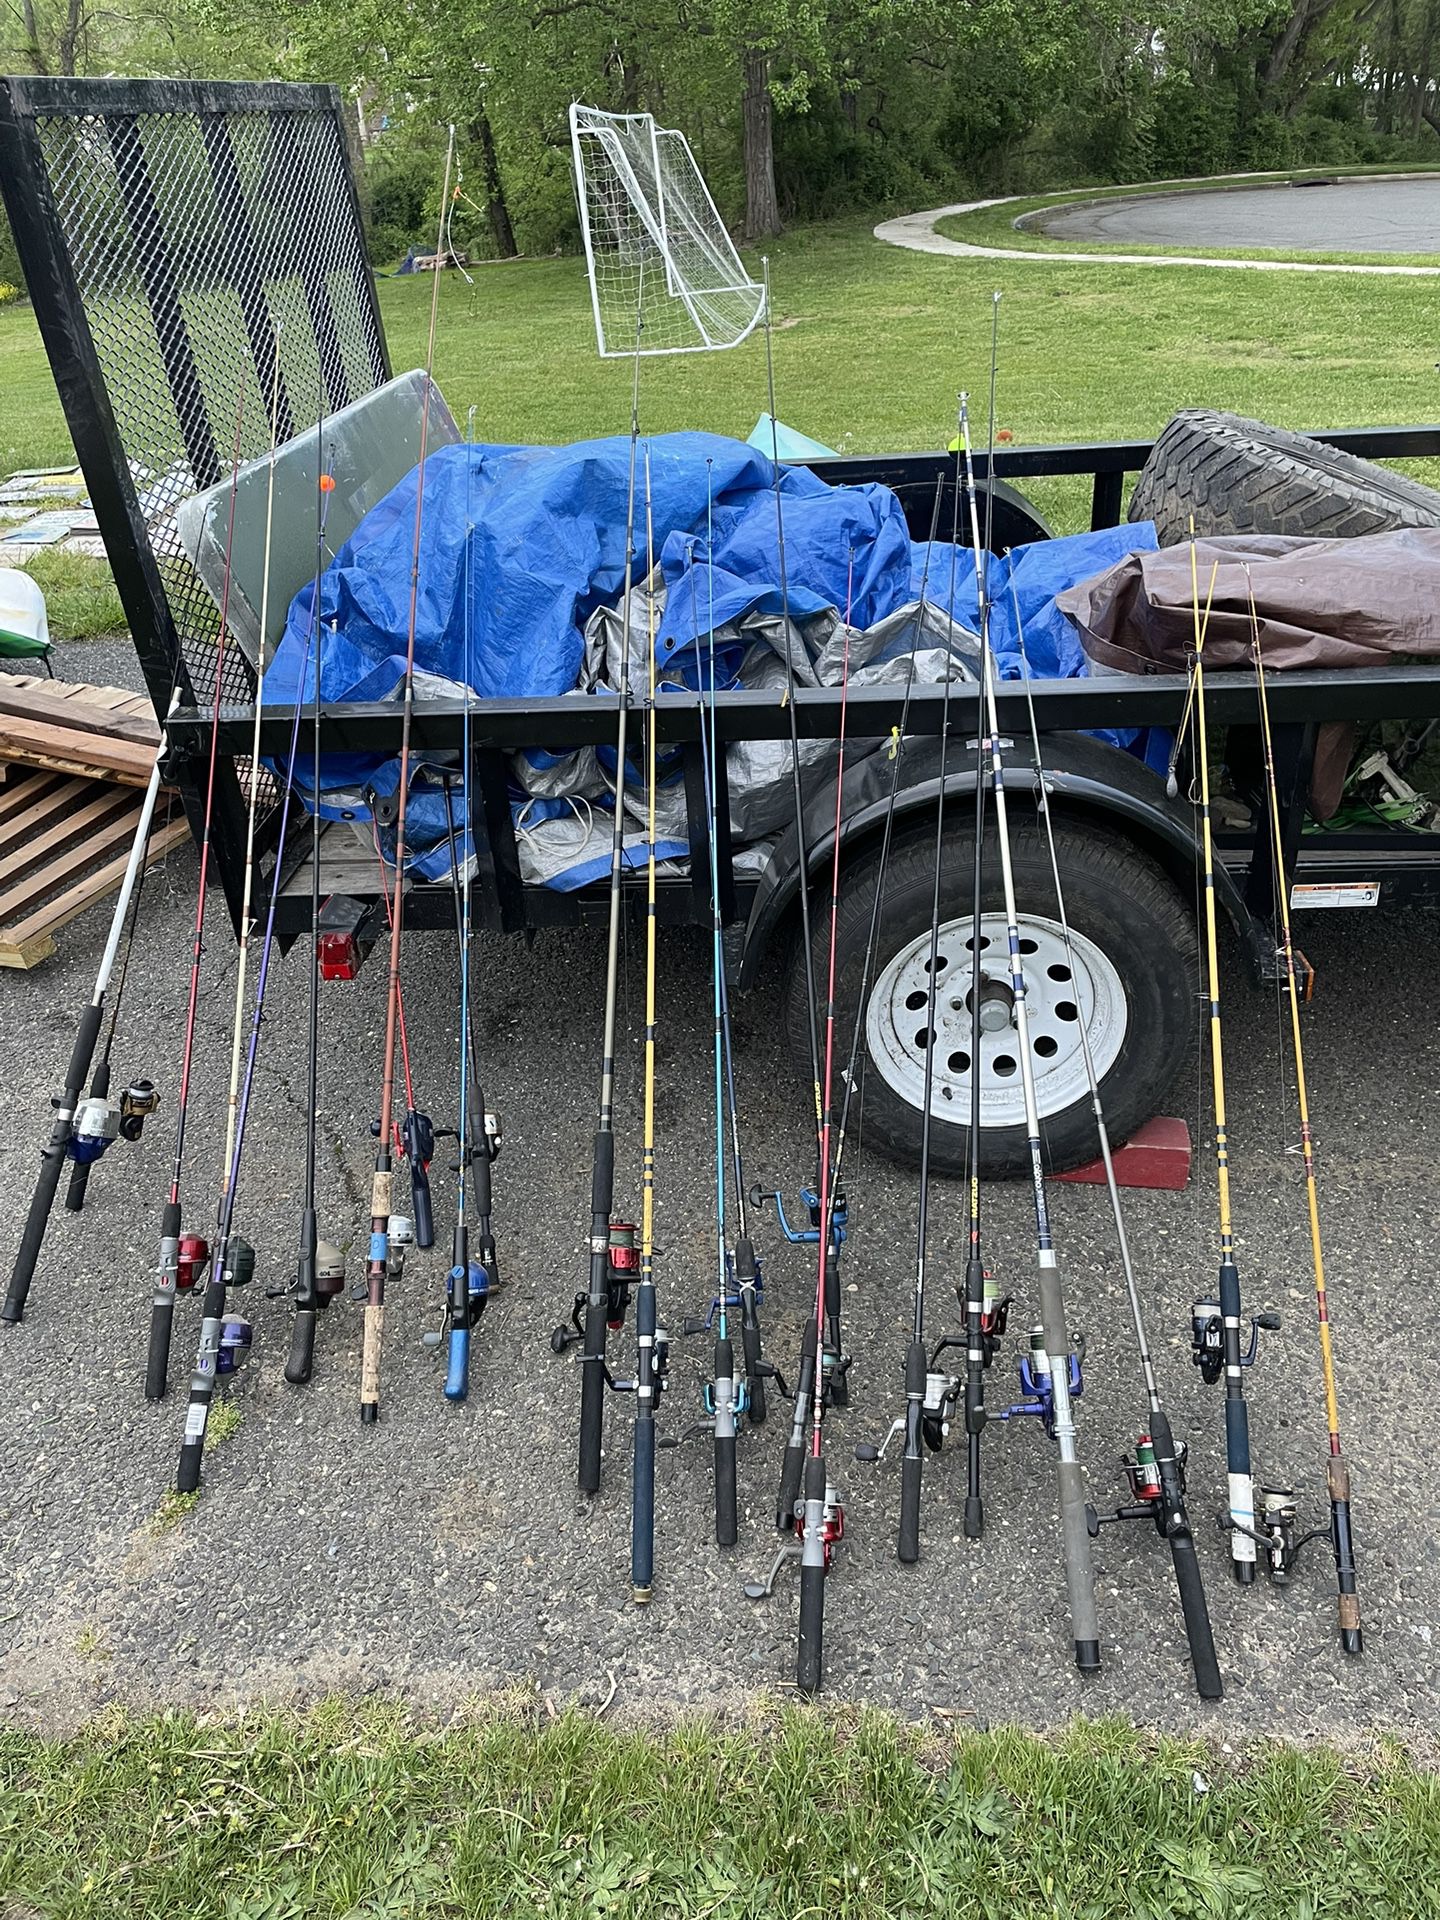 Fishing Rod and Reel lot